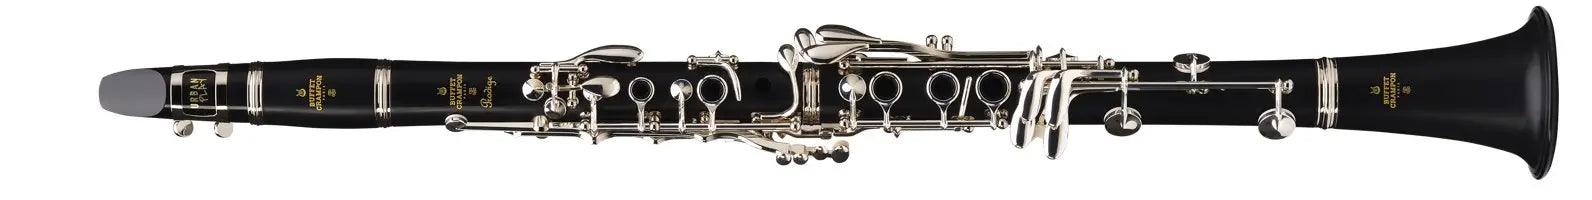 Buffet Bb Clarinet Prodige - Orchestral - Woodwind Section by Buffet at Muso's Stuff